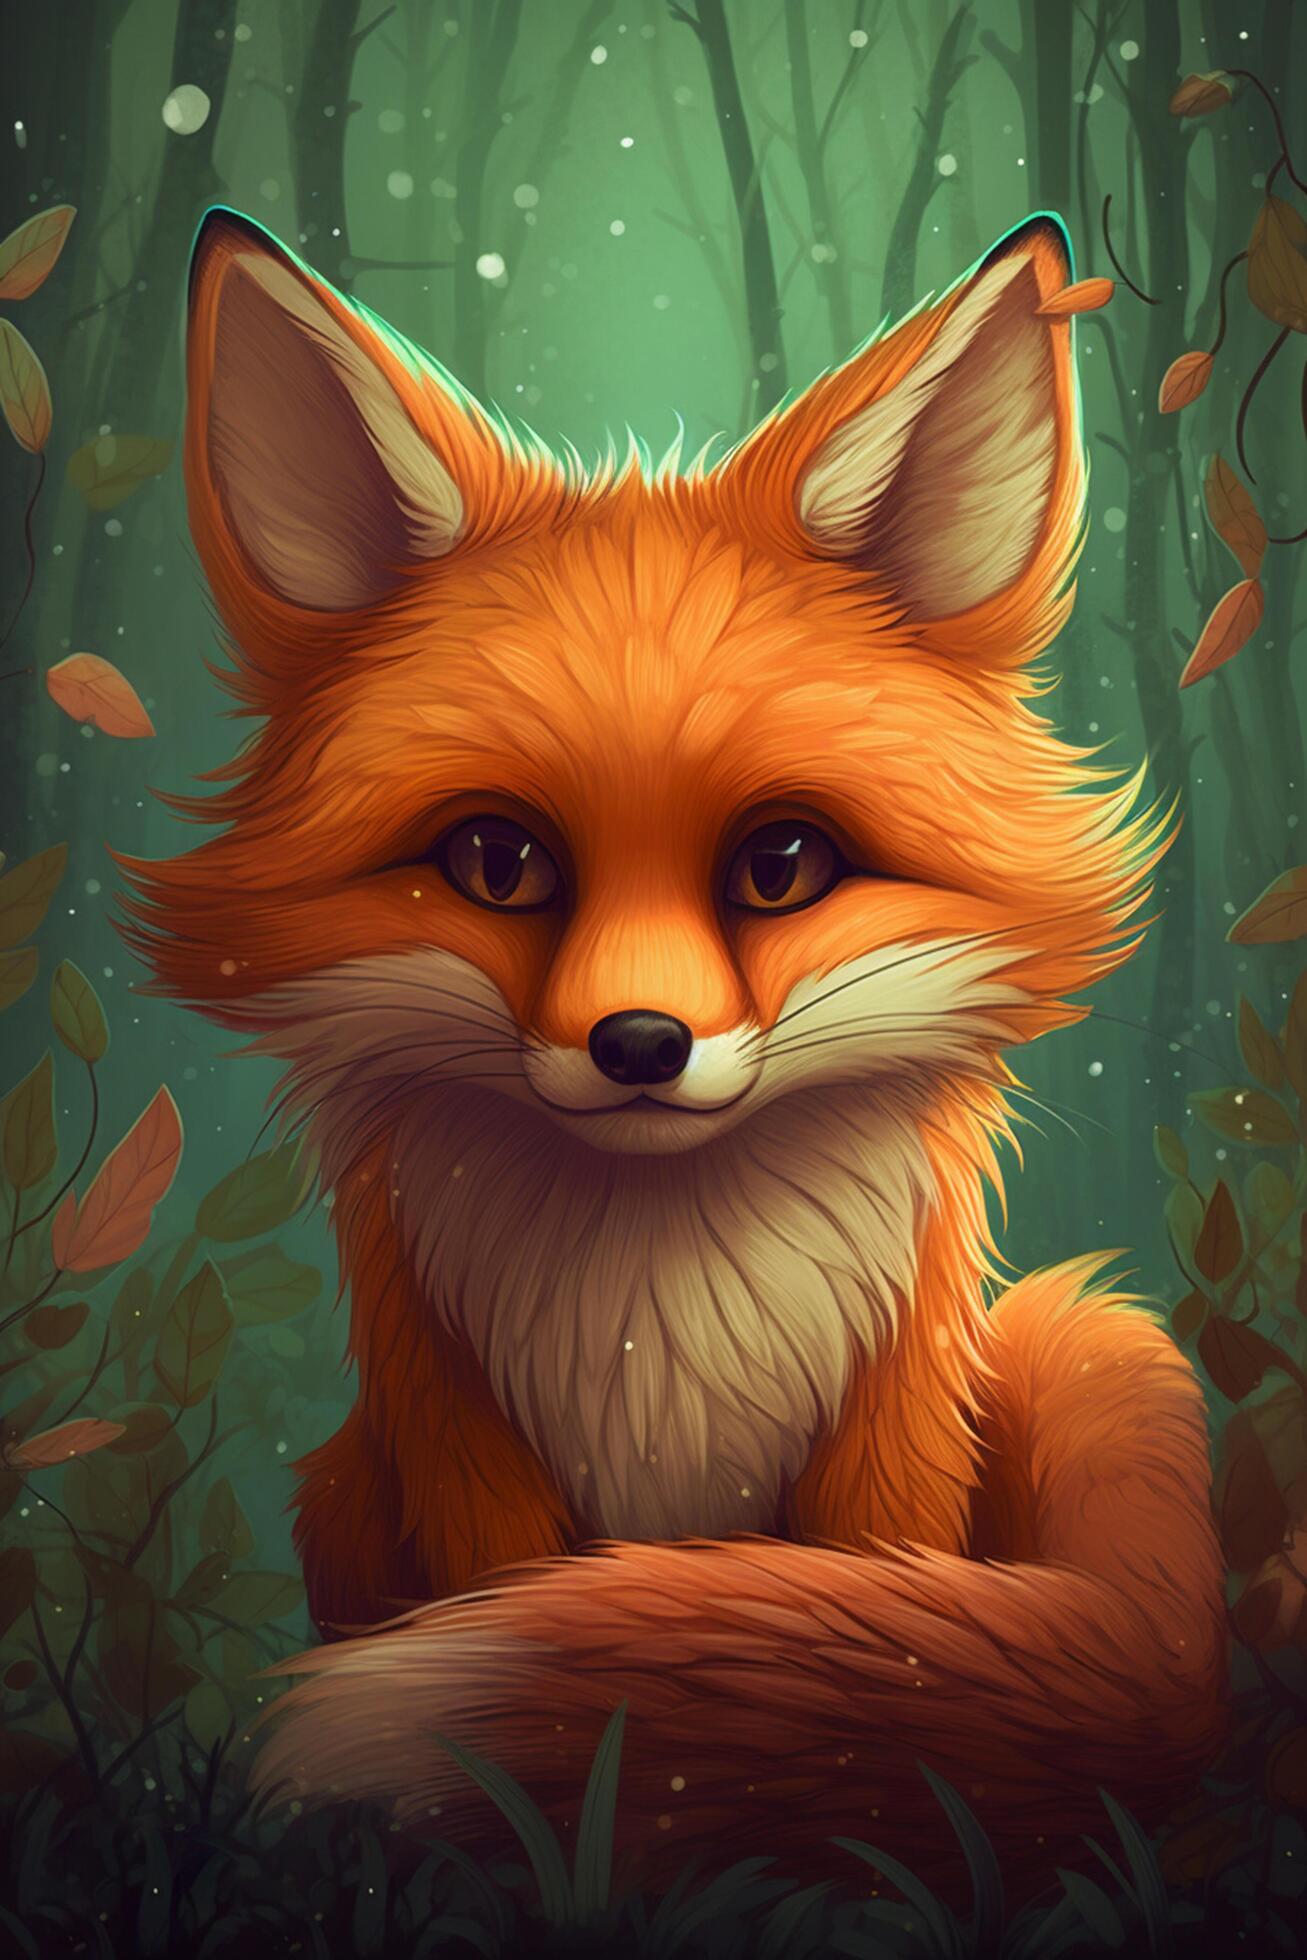 https://static.vecteezy.com/system/resources/previews/024/058/901/large_2x/enchanting-adventures-of-a-little-fox-in-a-magical-realm-a-comic-style-digital-painting-with-vivid-contrasting-colors-ai-generated-free-photo.jpg